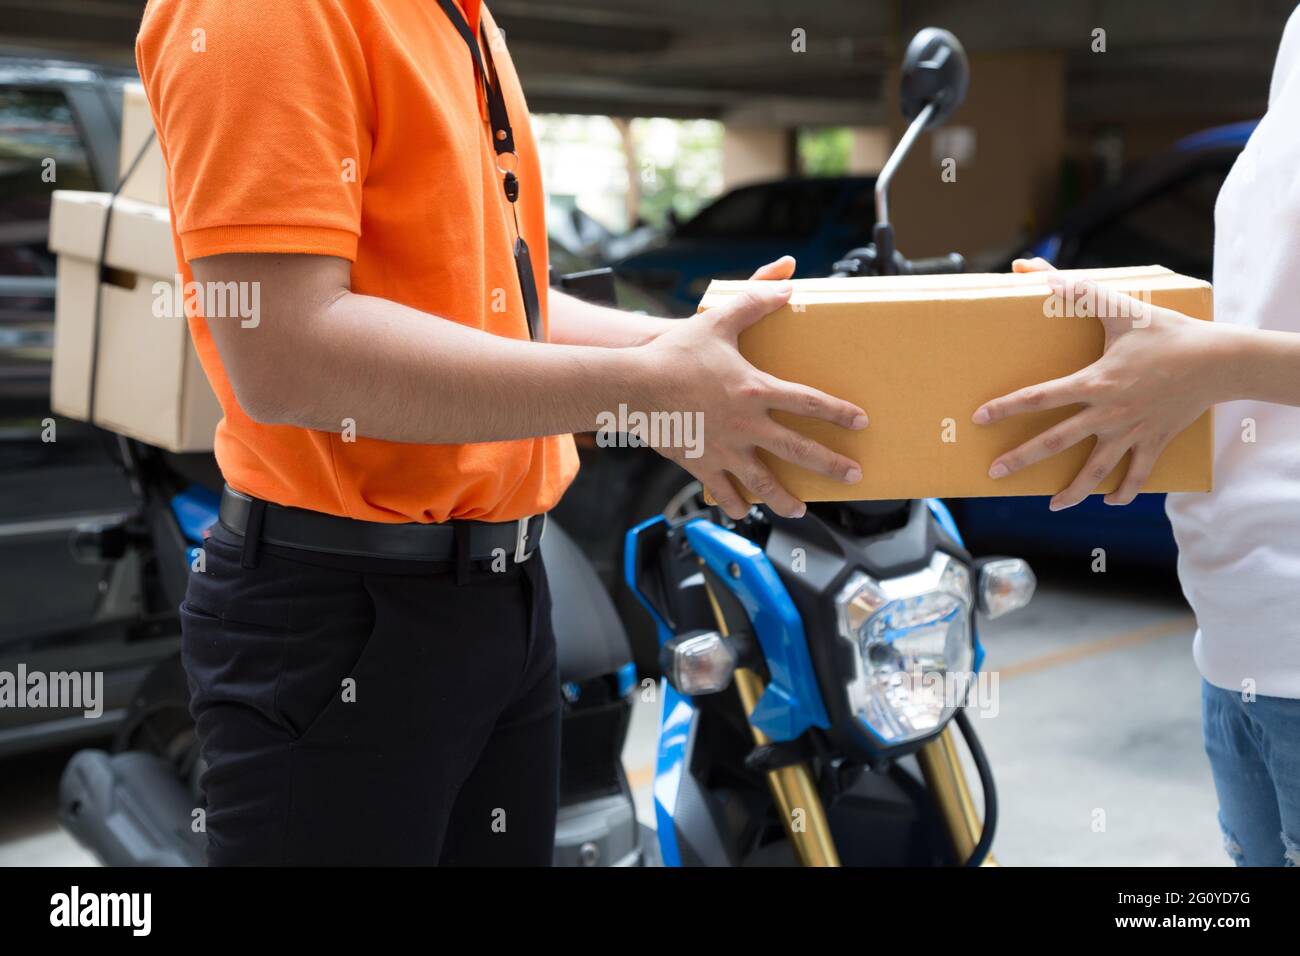 Woman hand accepting a delivery of boxes from deliveryman, Deliver goods by motorcycle service, Fast and Free Transport Stock Photo